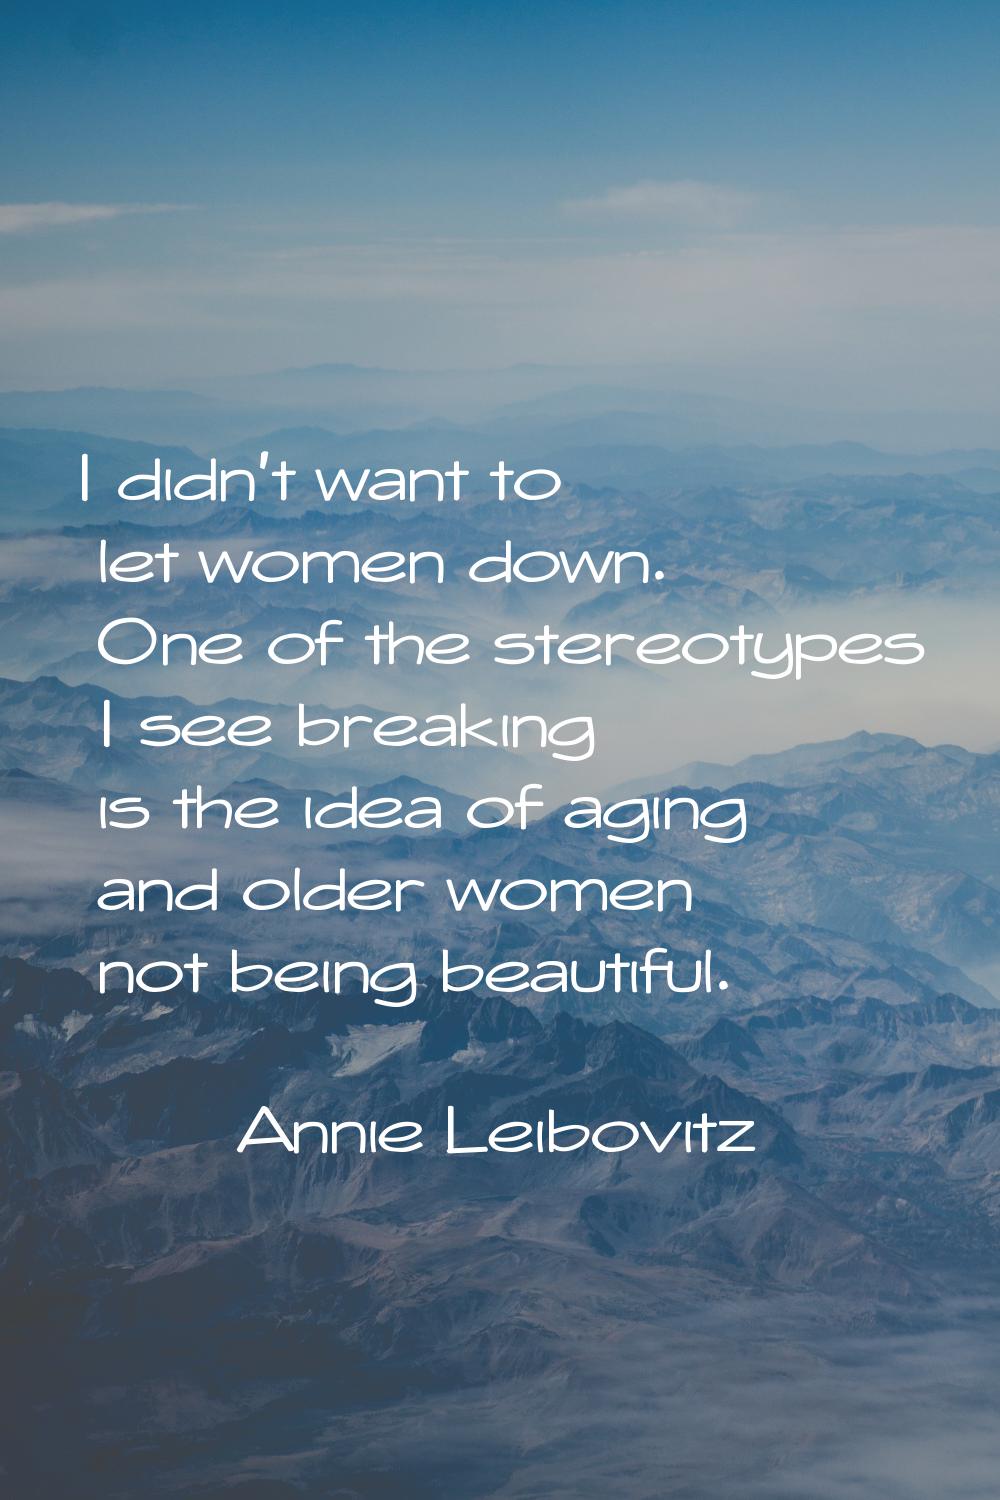 I didn't want to let women down. One of the stereotypes I see breaking is the idea of aging and old